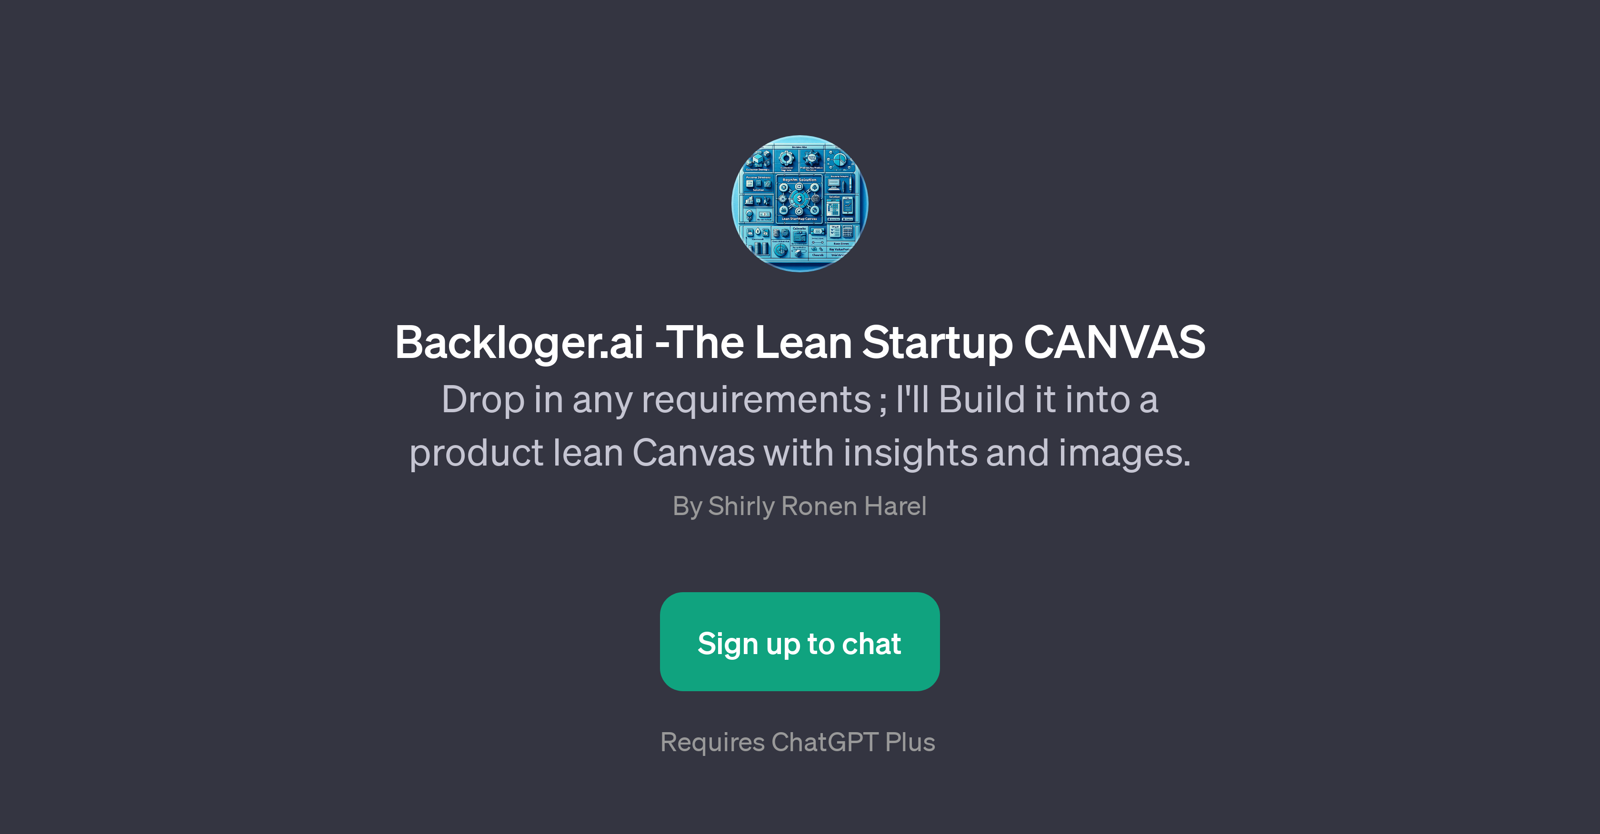 Backloger.ai - The Lean Startup CANVAS website